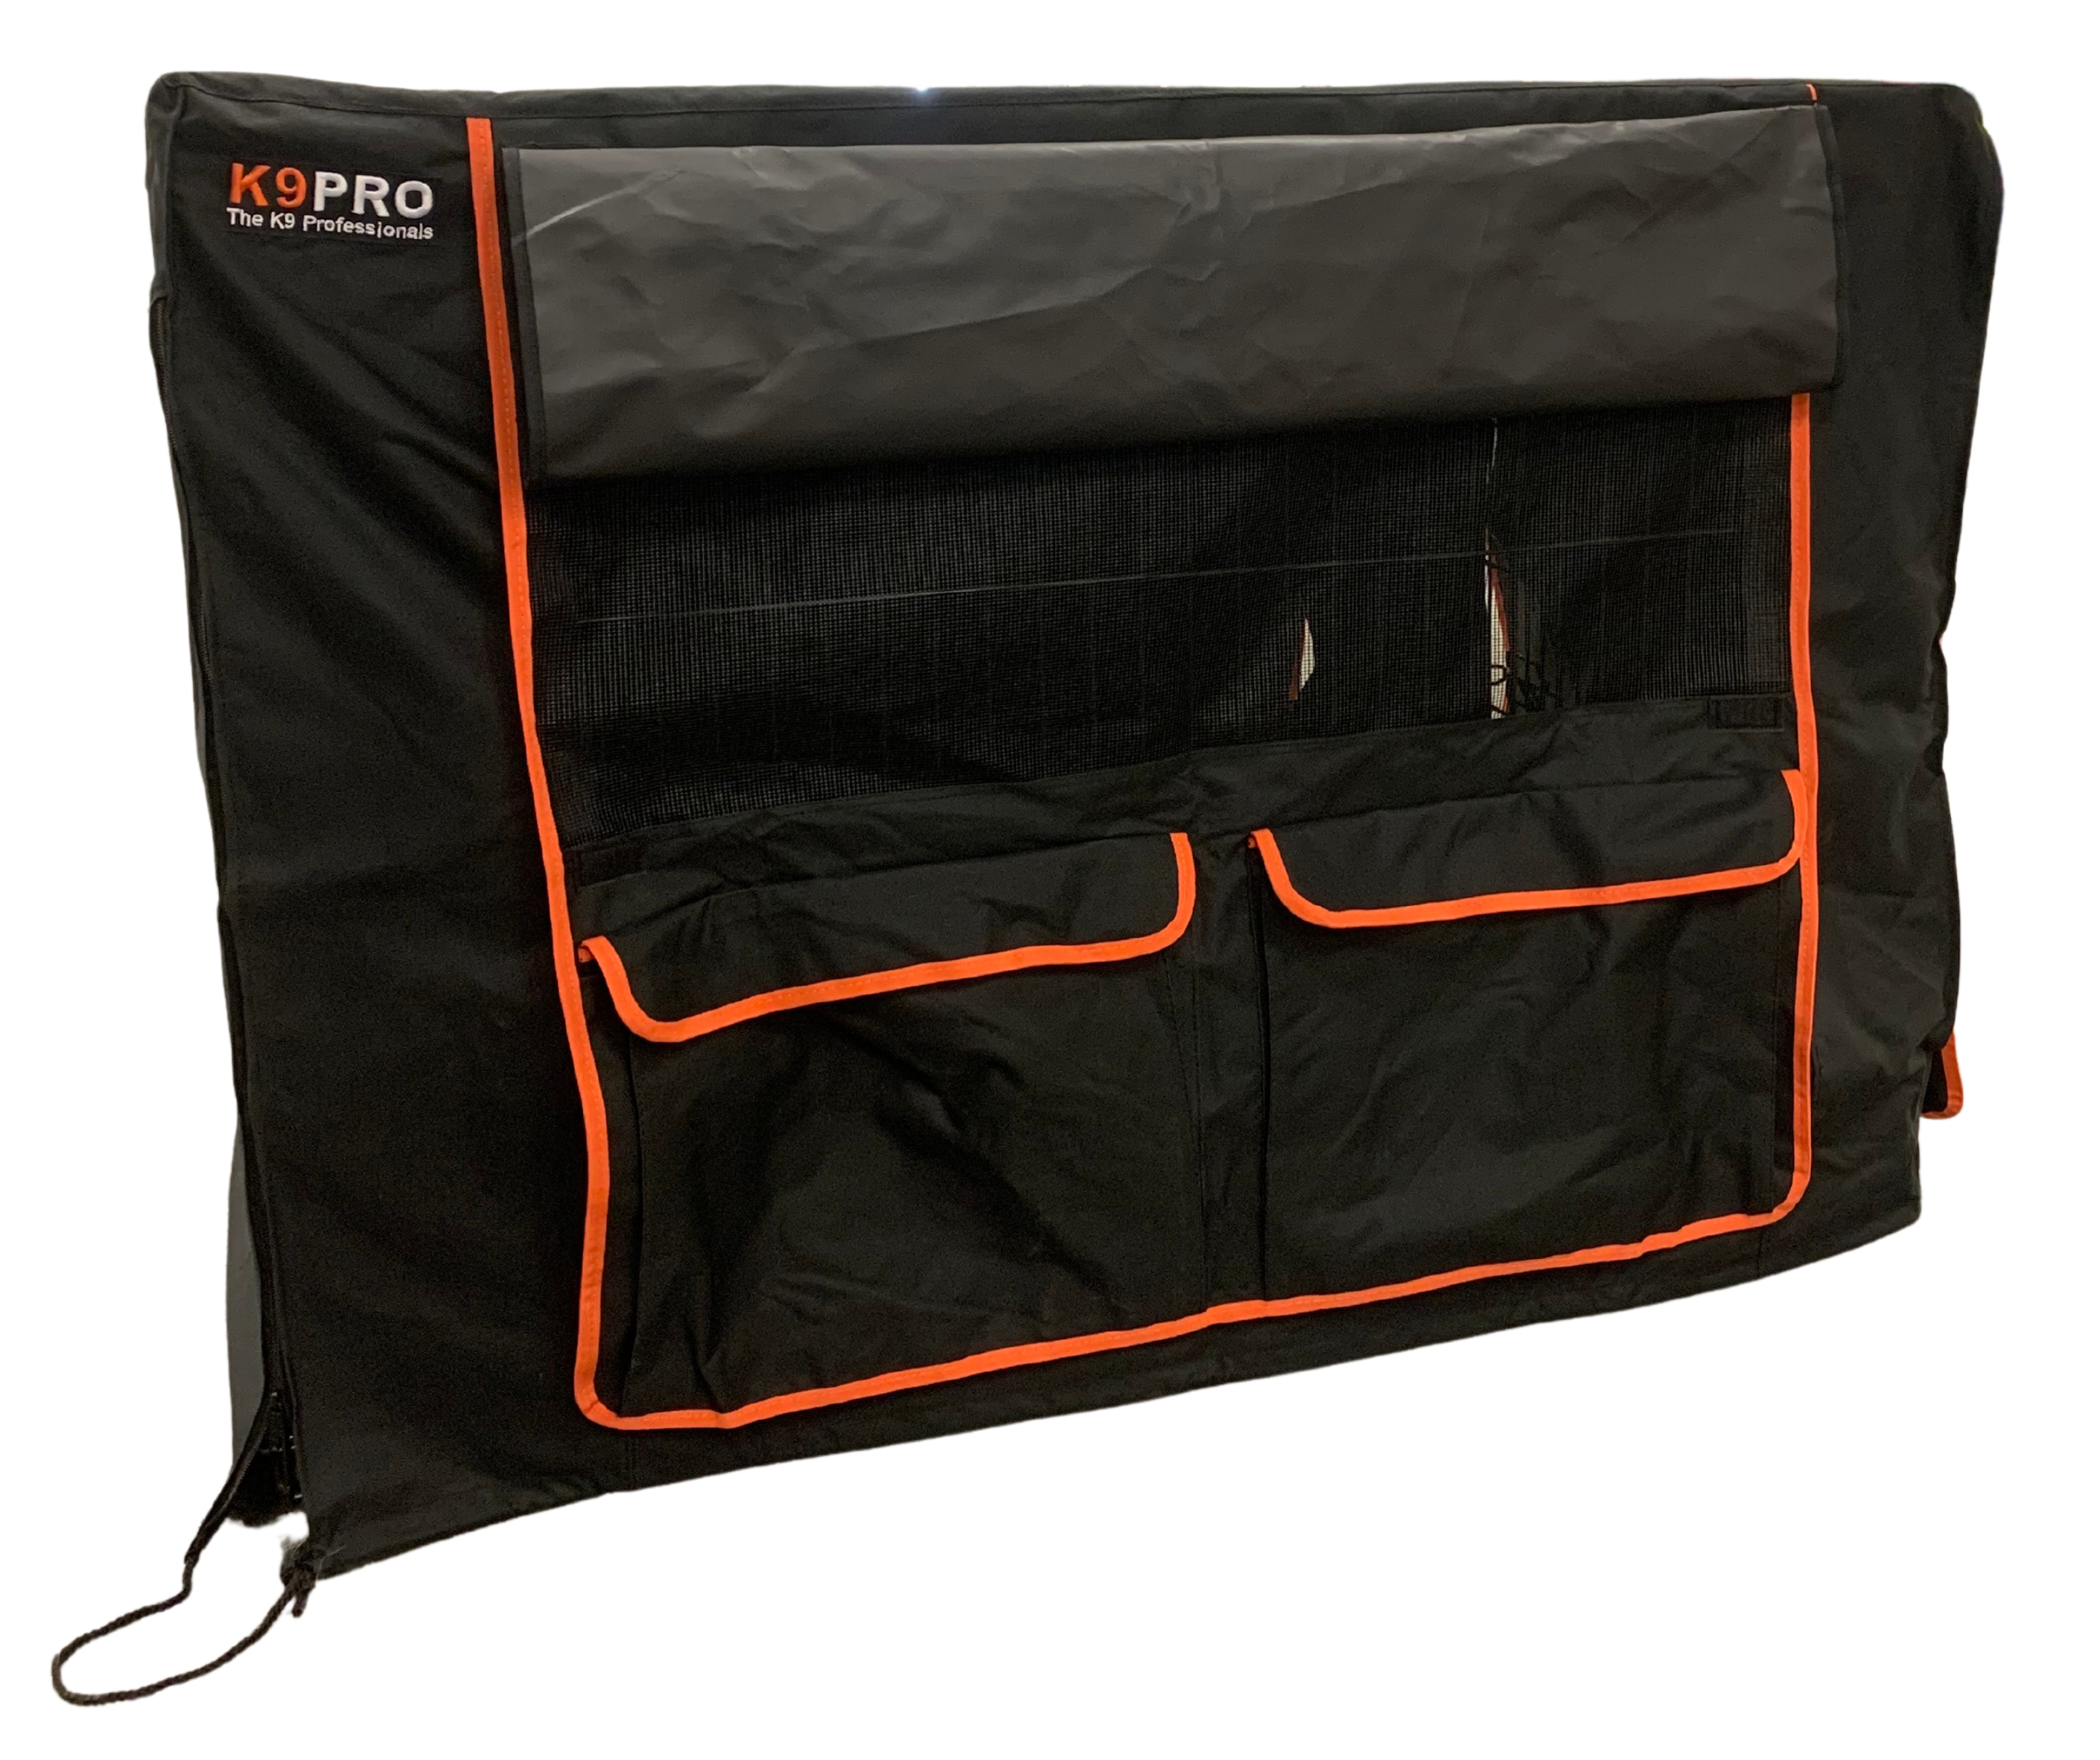 Crate Covers - Designed by K9 PRO